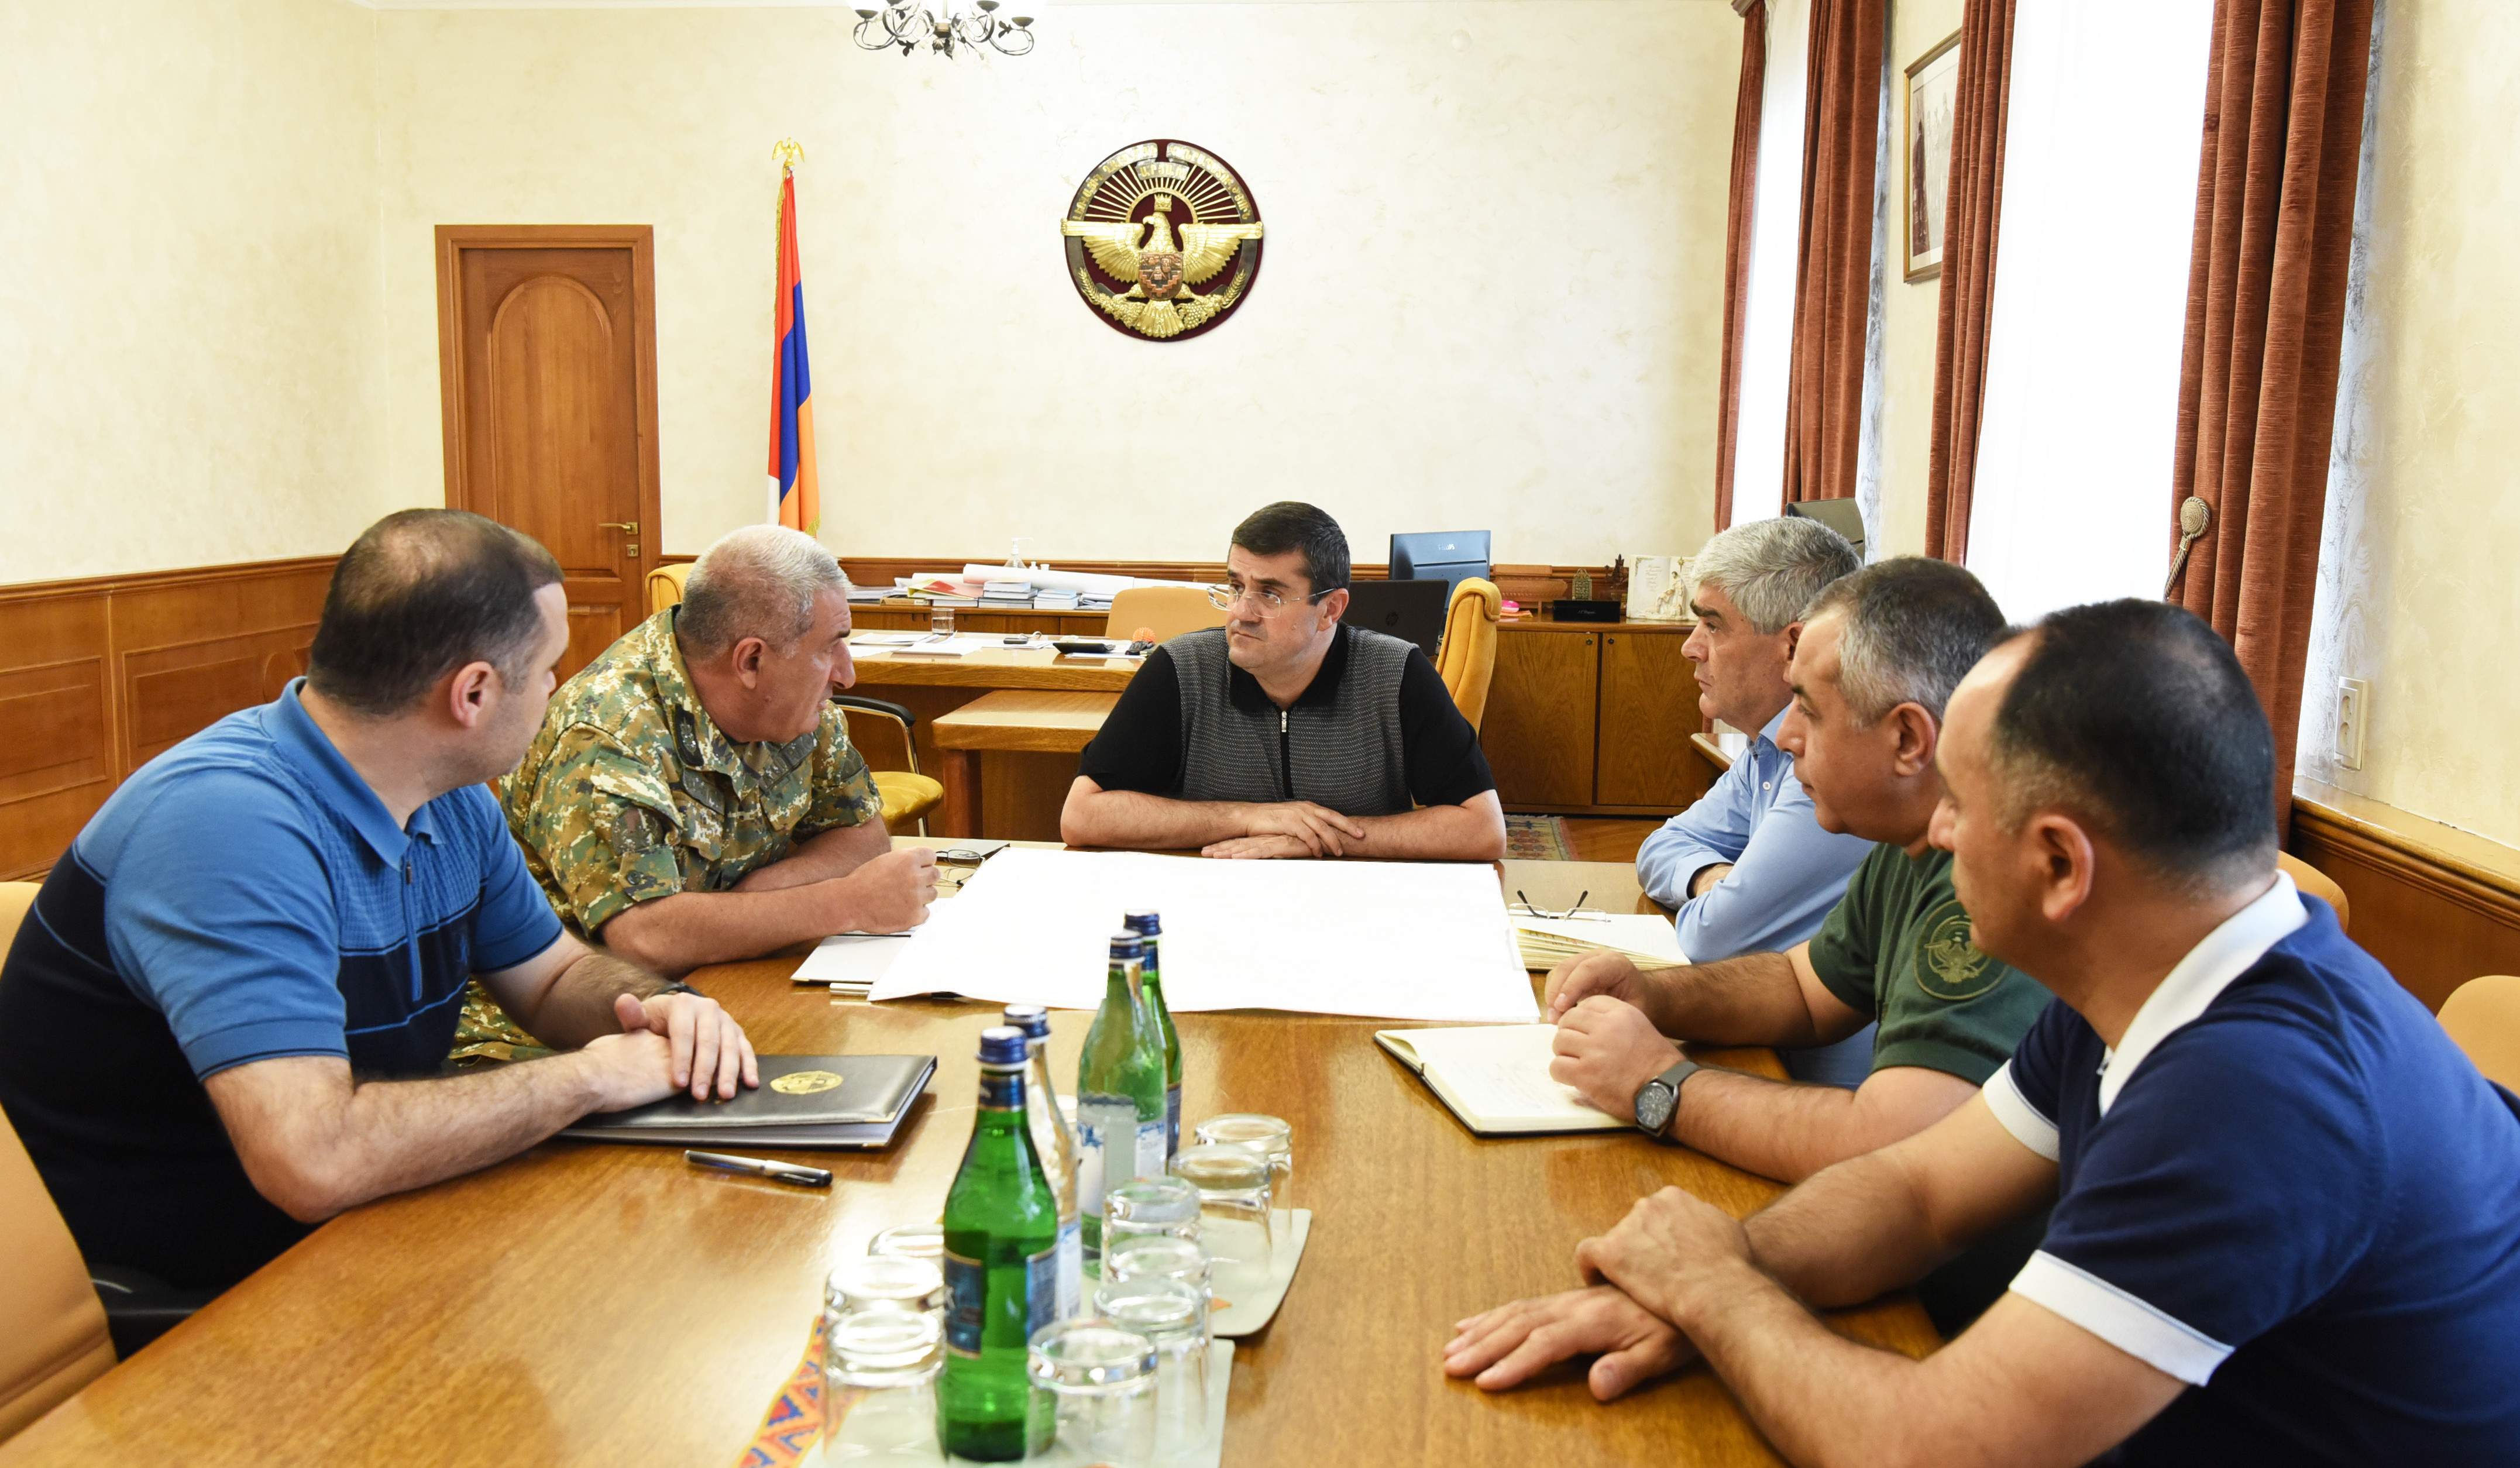 President of Artsakh called meeting with participation of officials of power structures